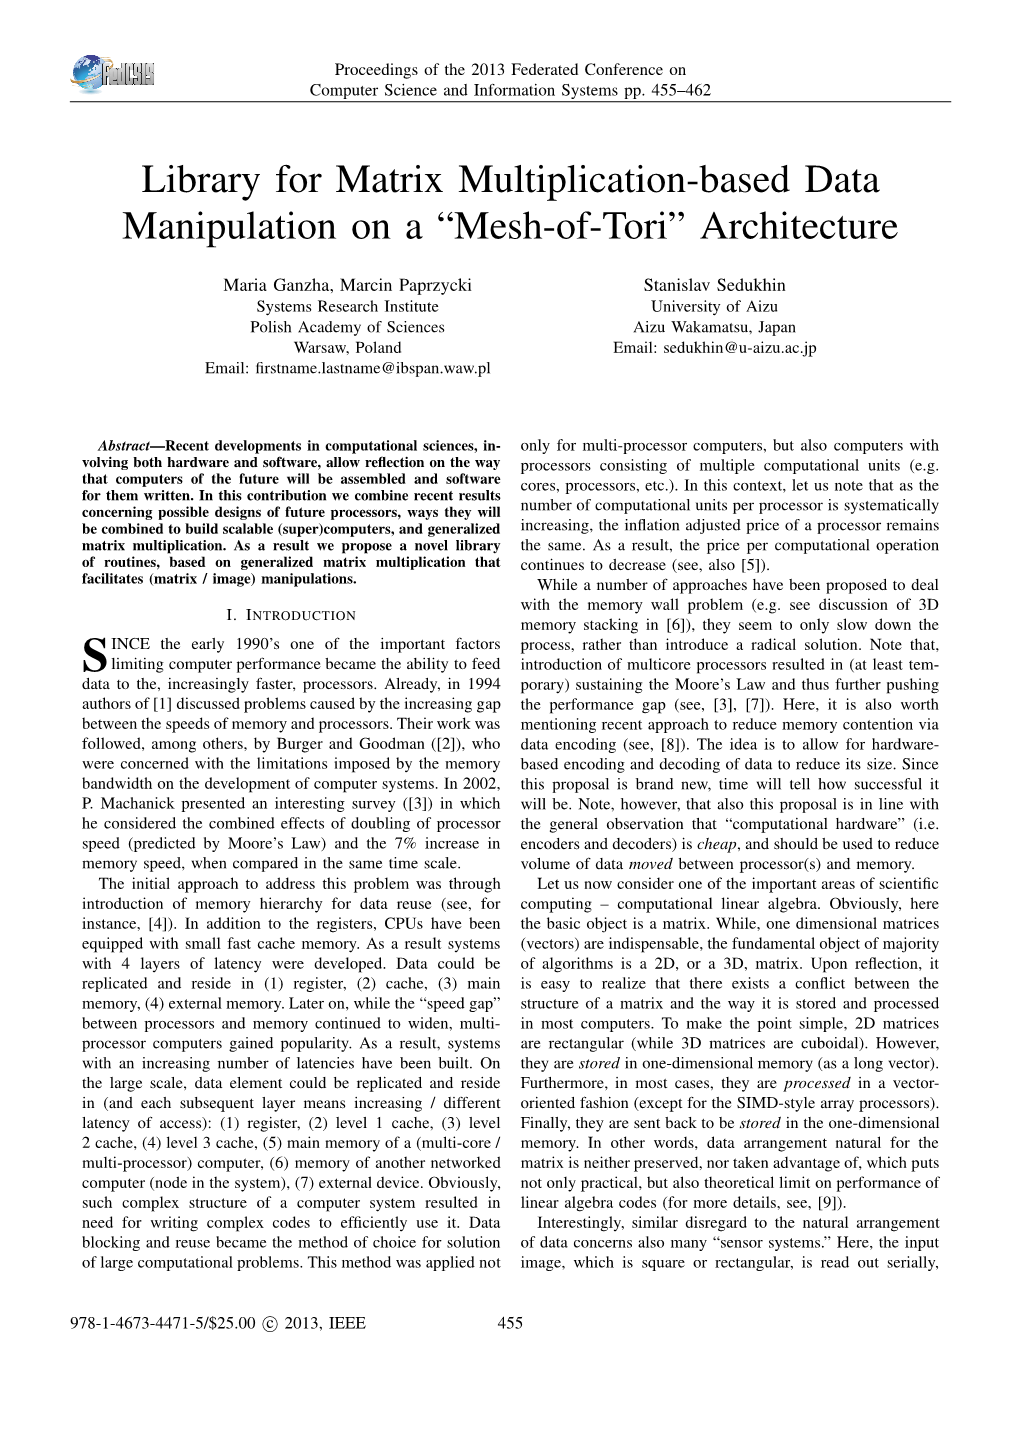 Library for Matrix Multiplication-Based Data Manipulation on a “Mesh-Of-Tori” Architecture